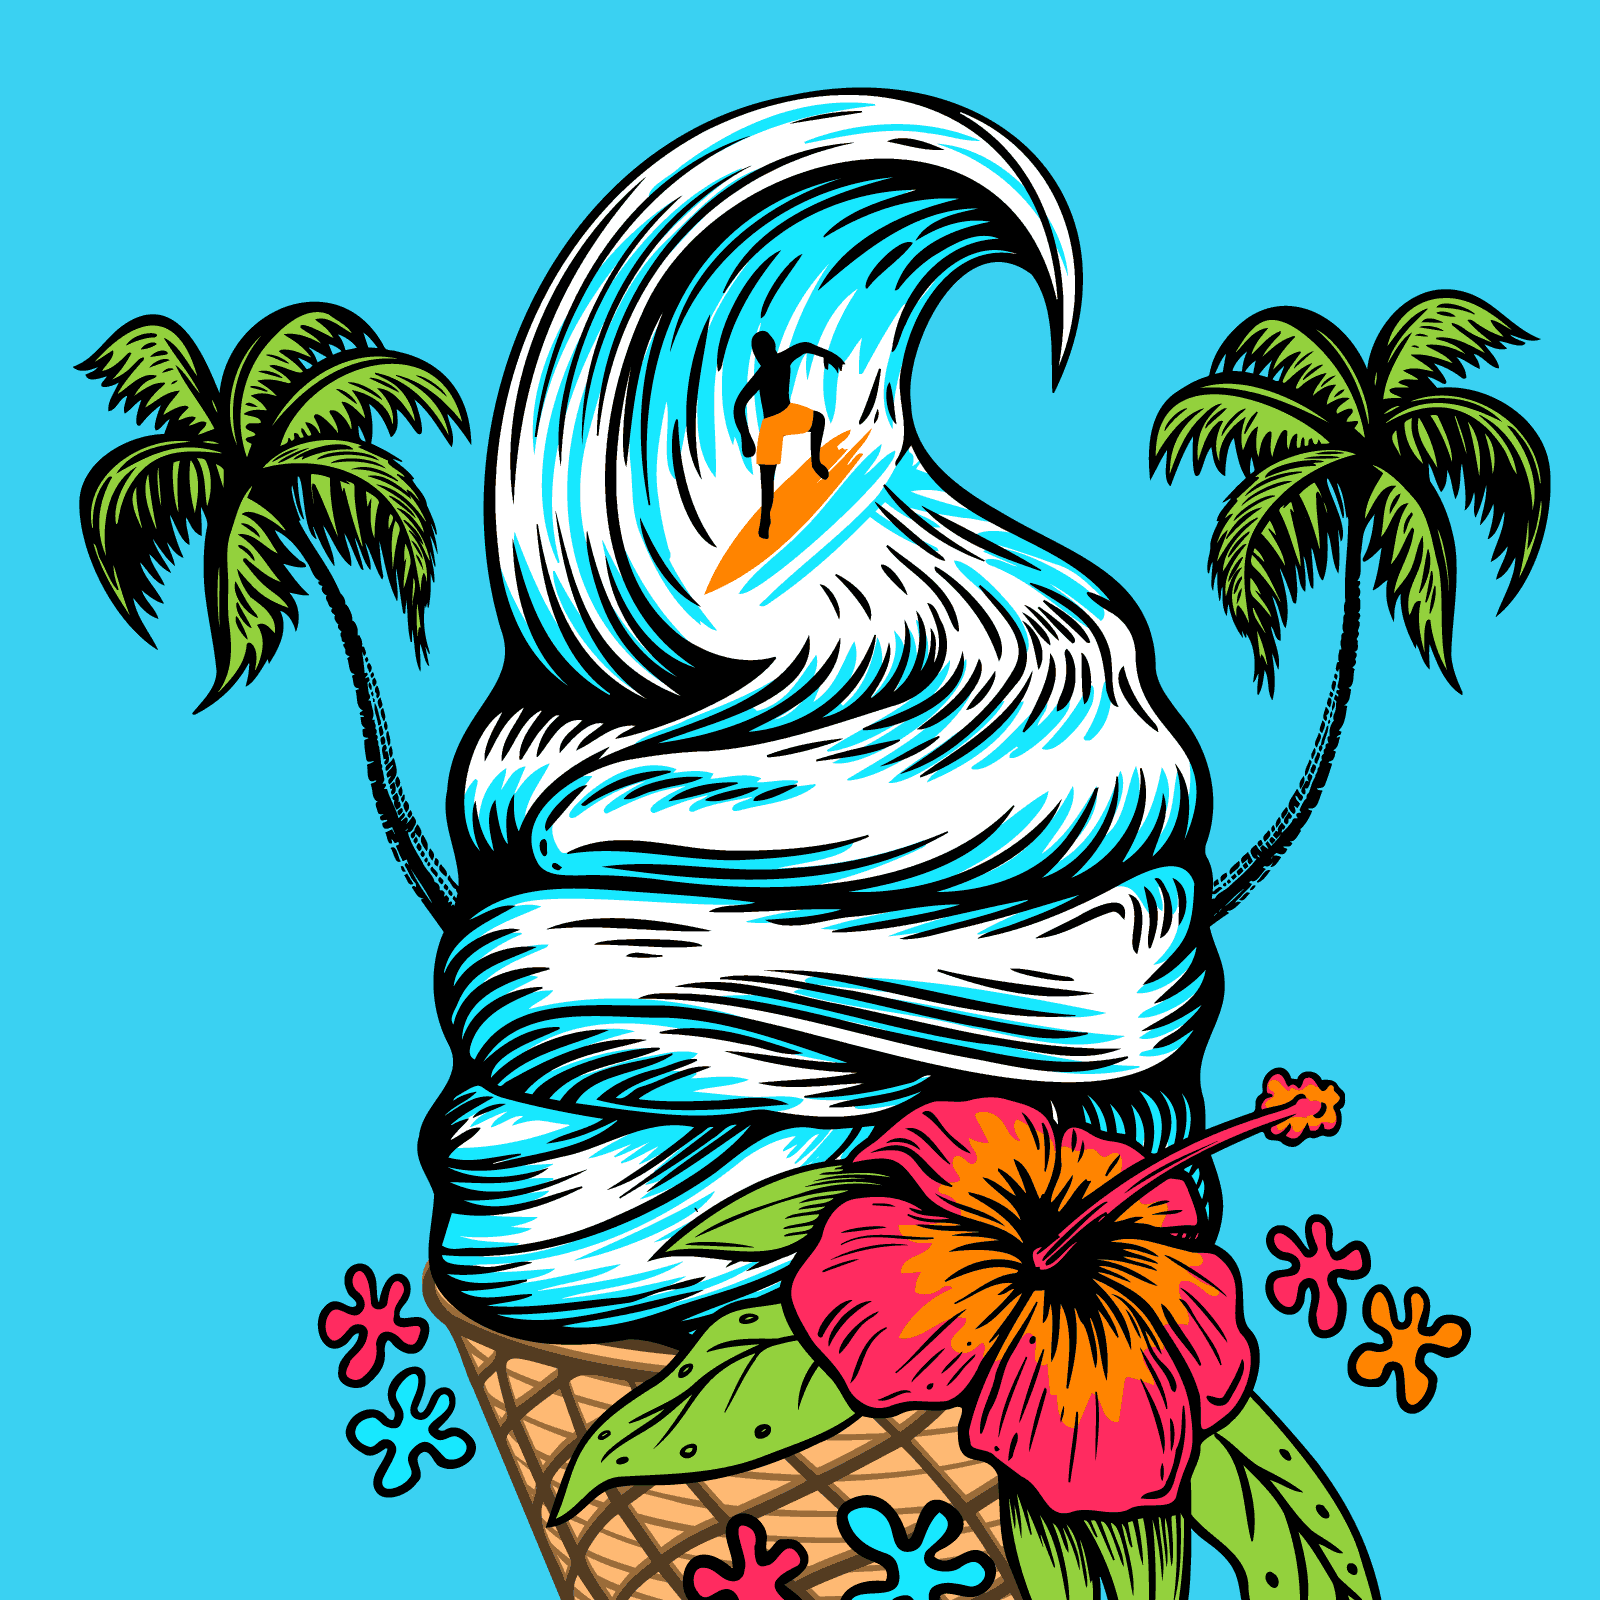 Tropical Delight